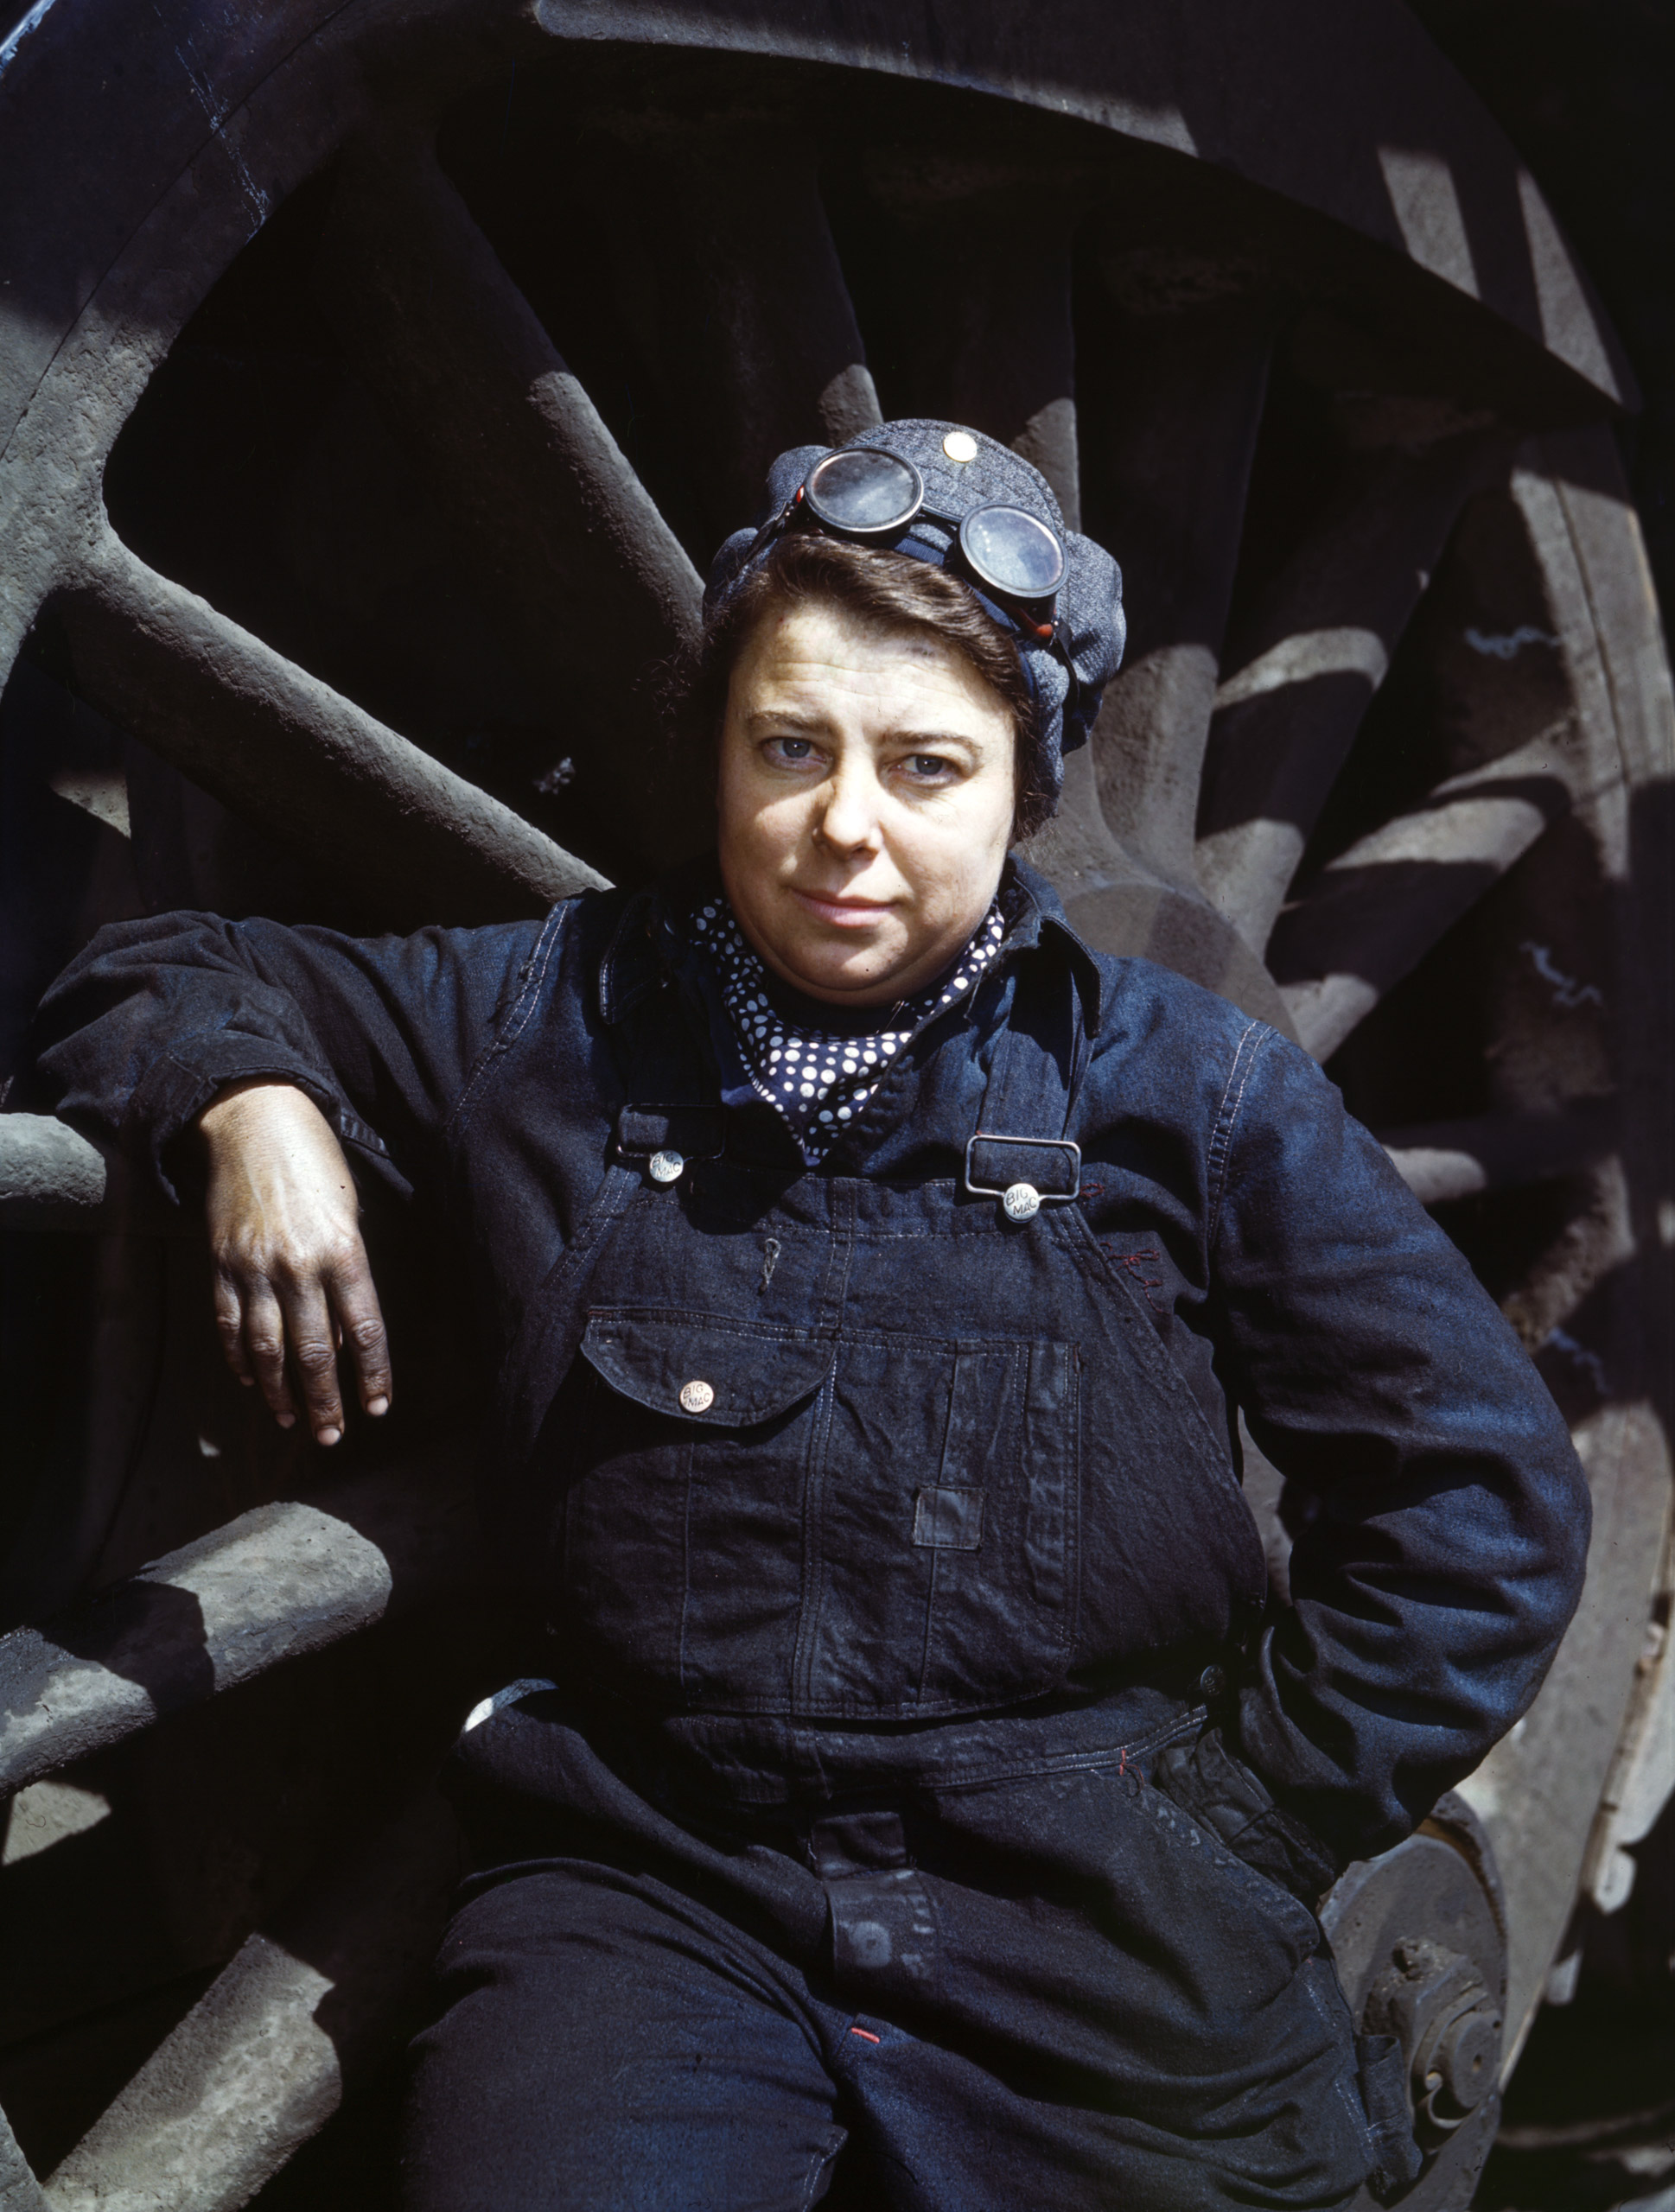 Chicago and North Western Railway Company, Mrs. Dorothy Lucke, employed as a wiper at the roundhouse, Clinton, Iowa, April 1943. Photographed by Jack Delano for the Farm Security Administration.